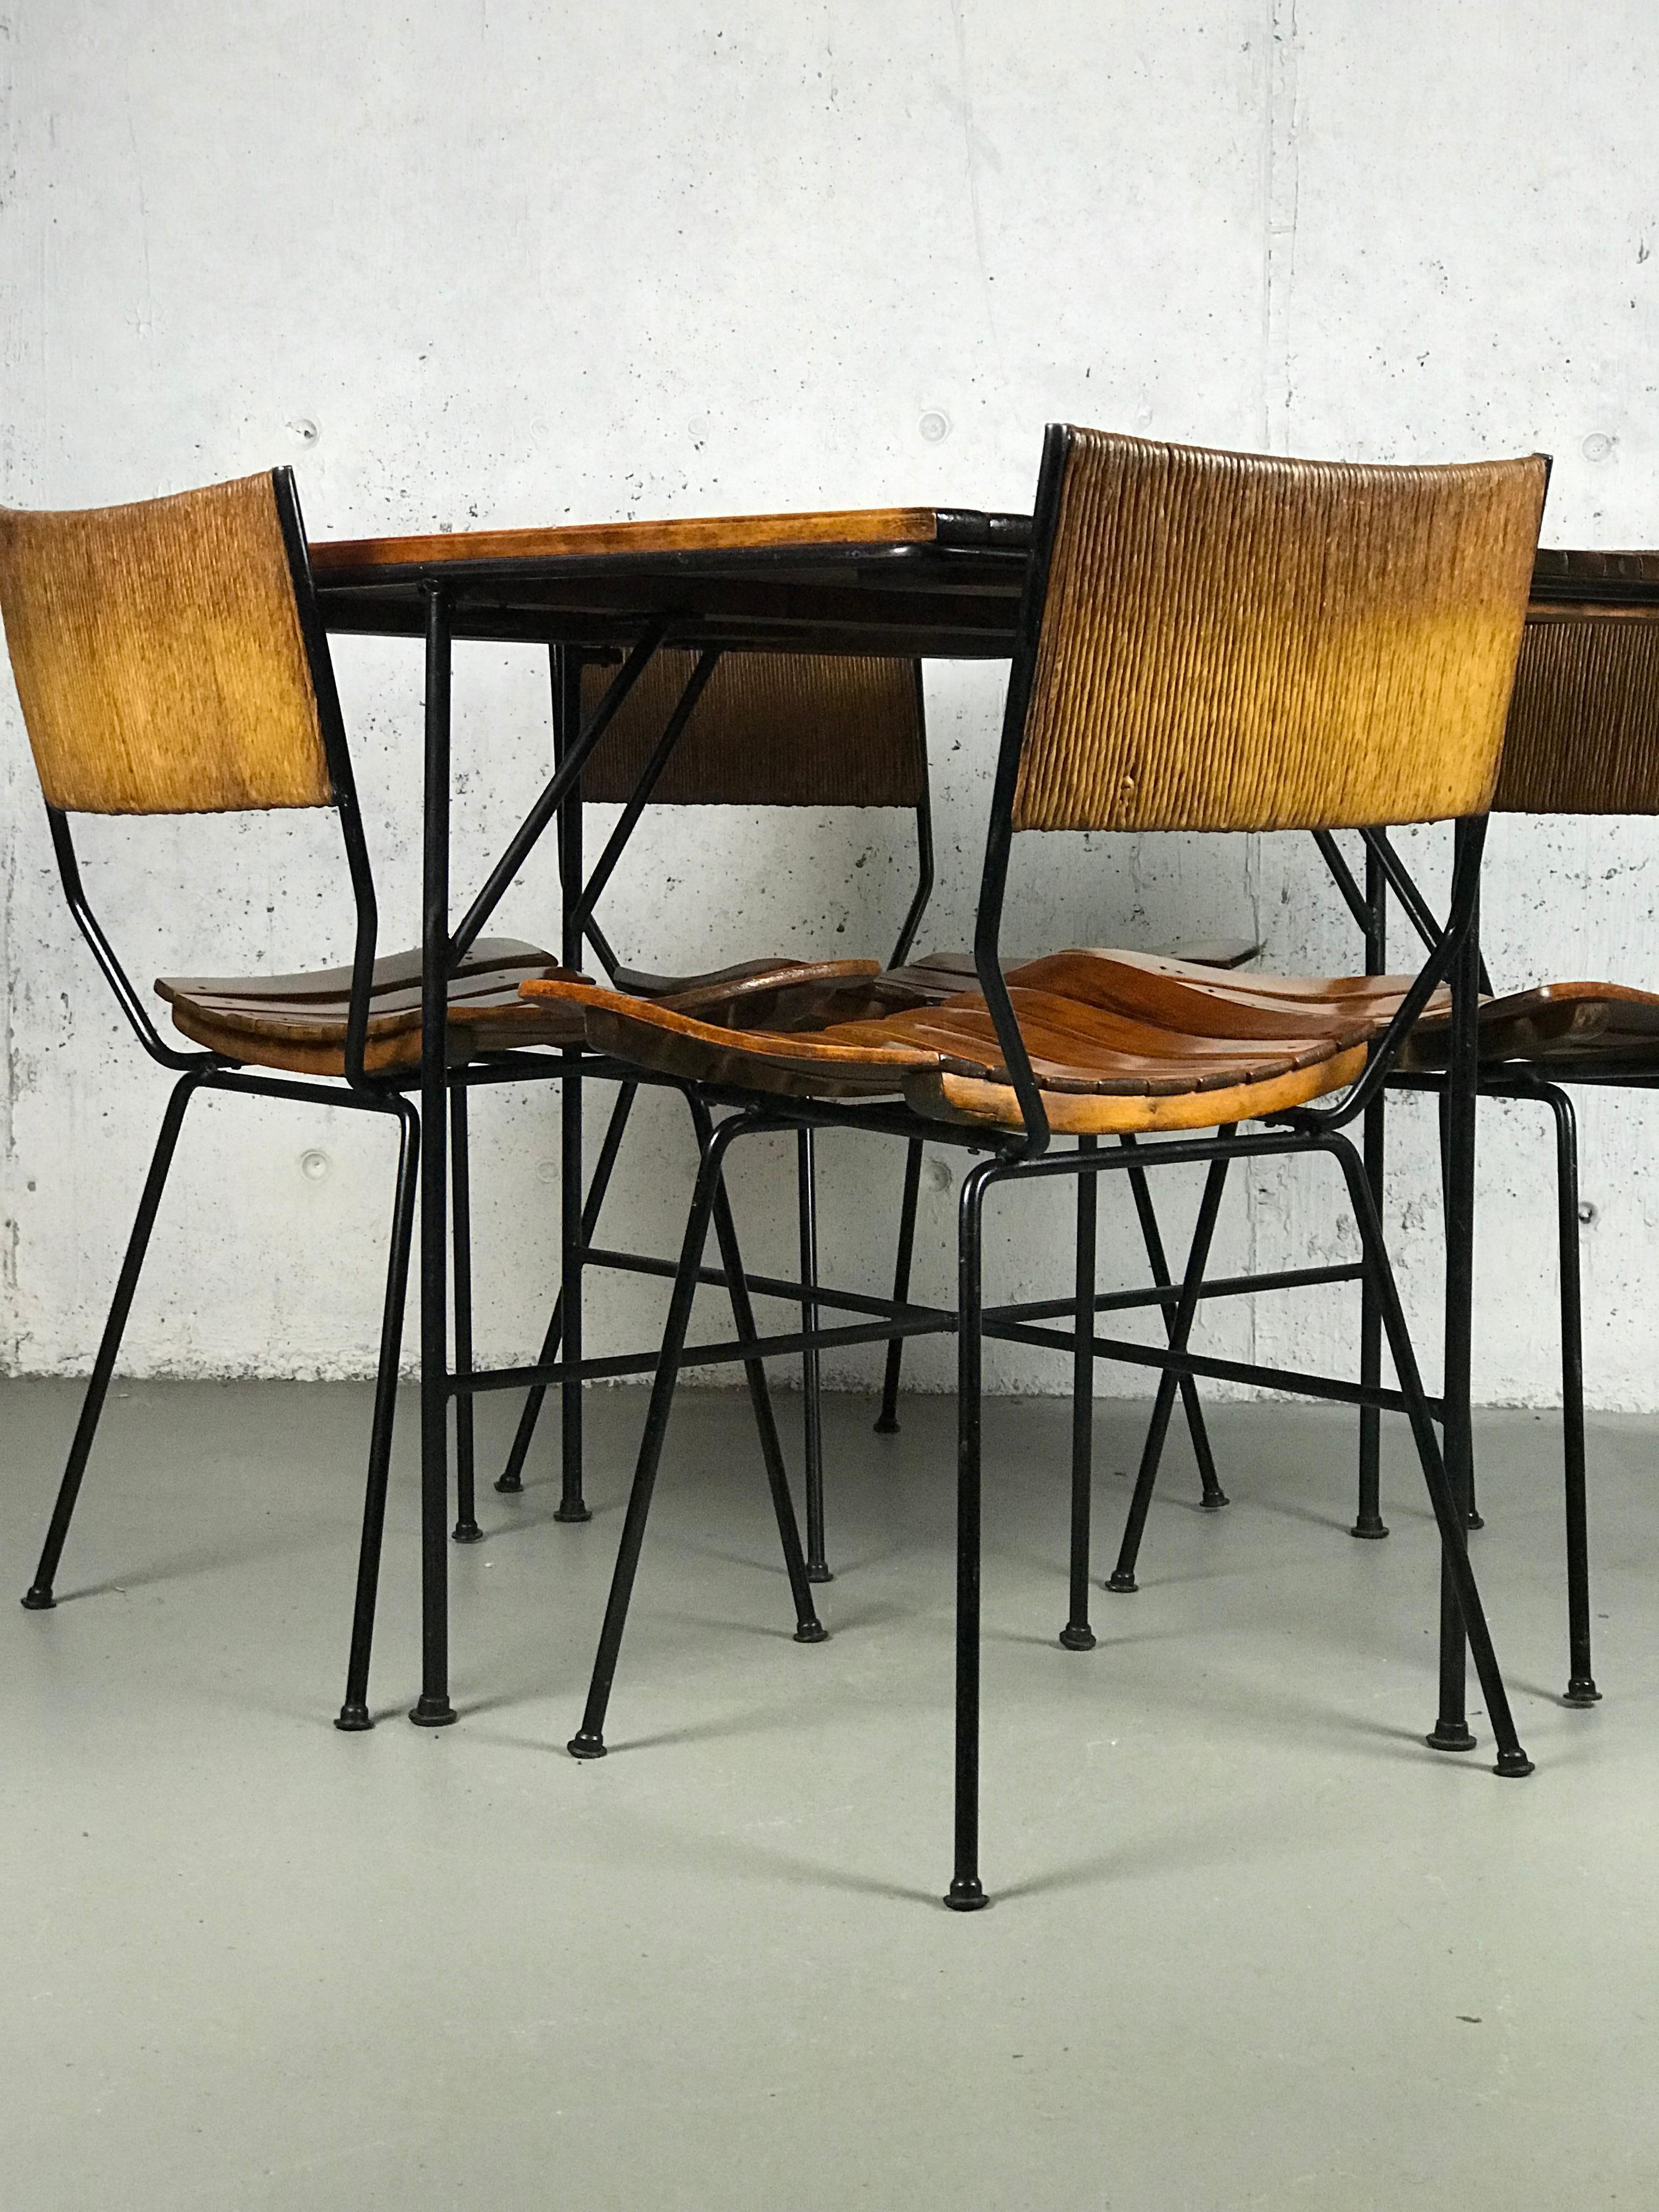 Mid-Century Modern (2) Dining Chairs in Iron Wood and Rope by Arthur Umanoff for Raymor